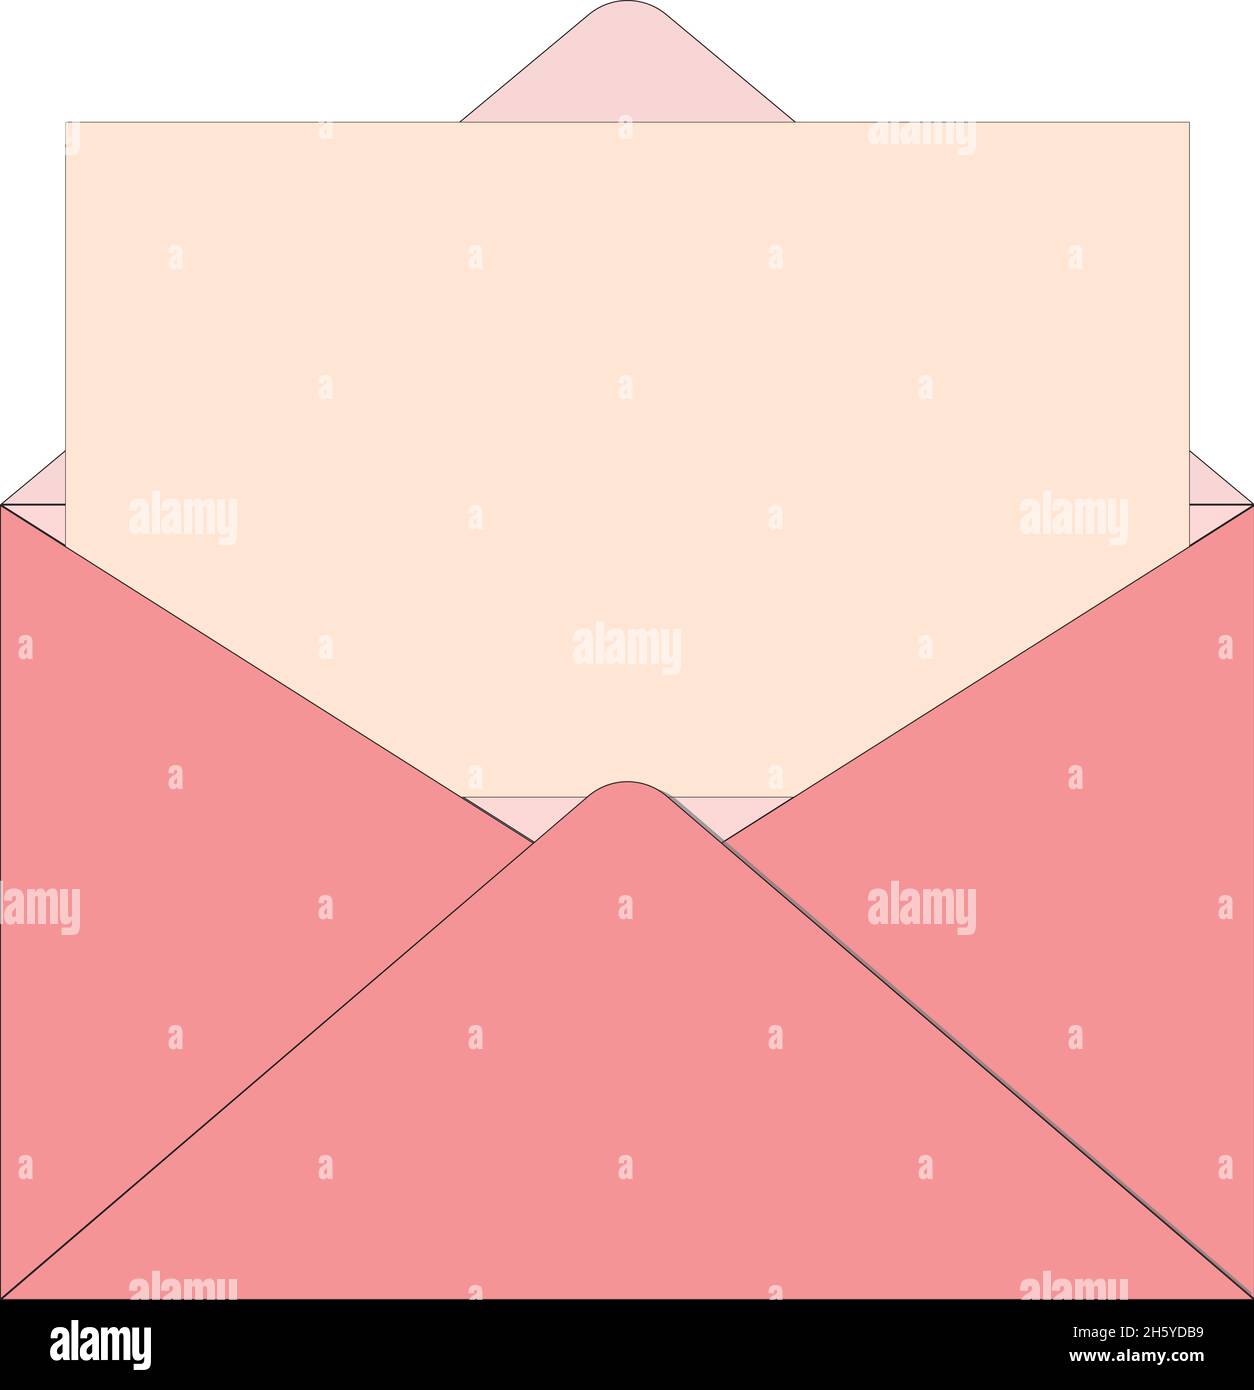 A letter in a pink envelope. Use it to send a message to someone. Stock Vector